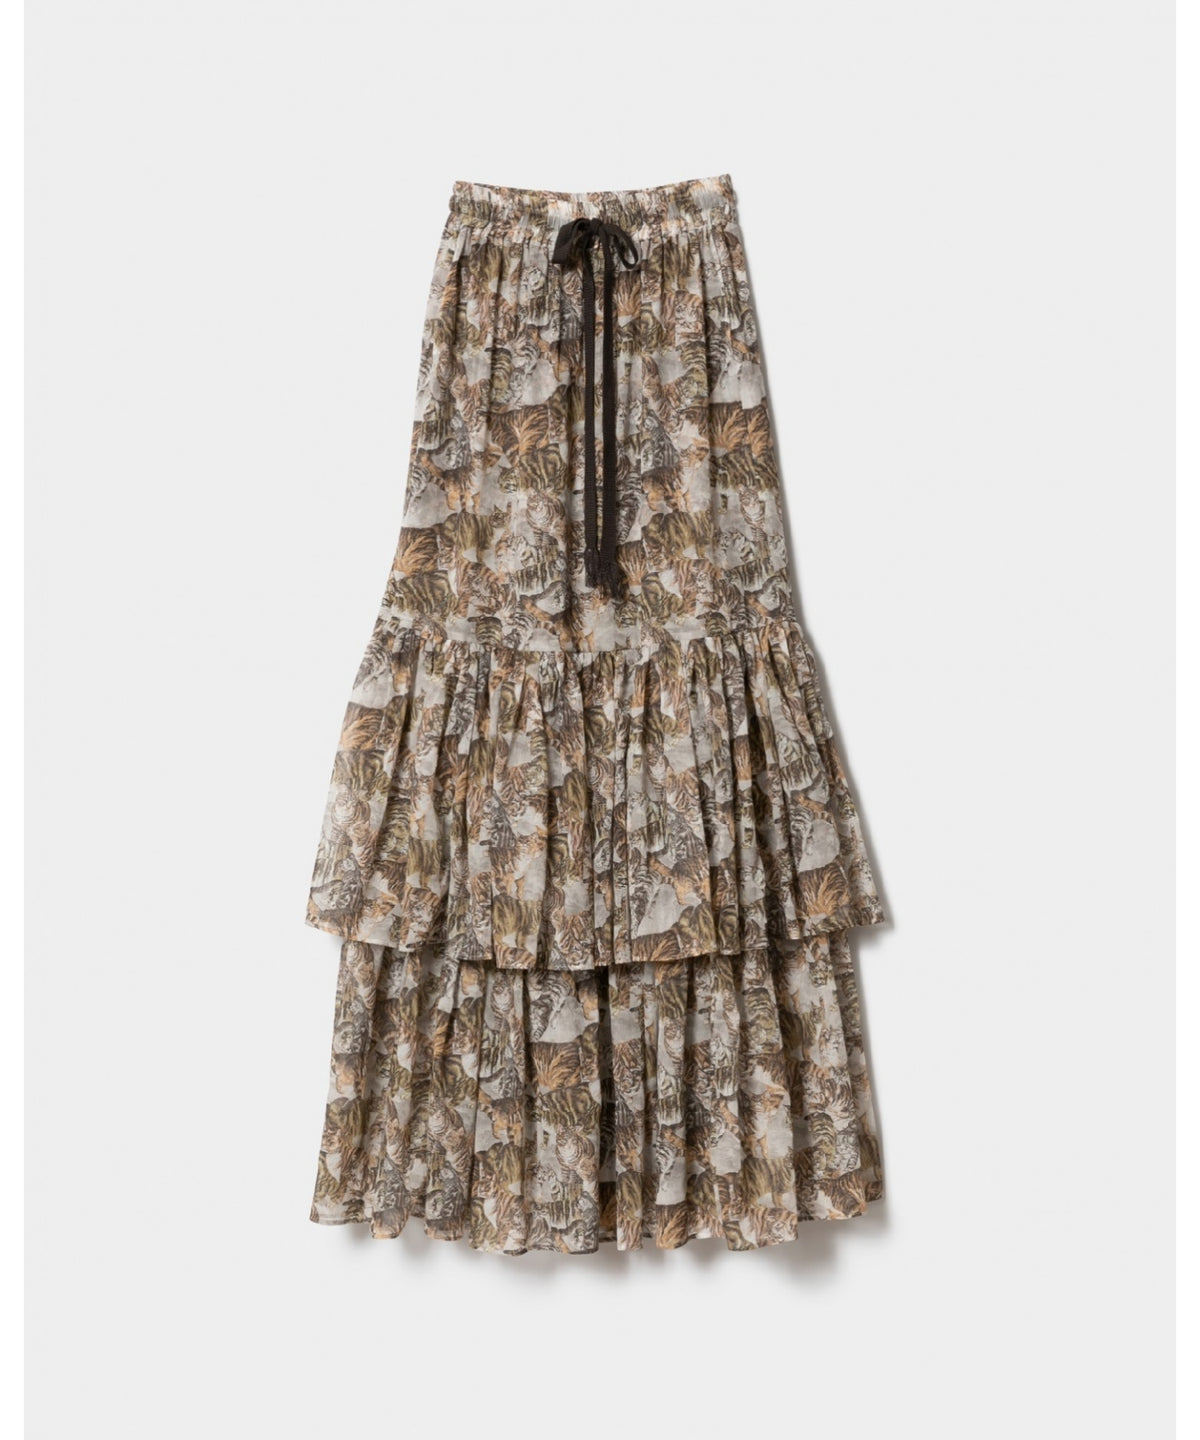 cats printed boil tiered skirt